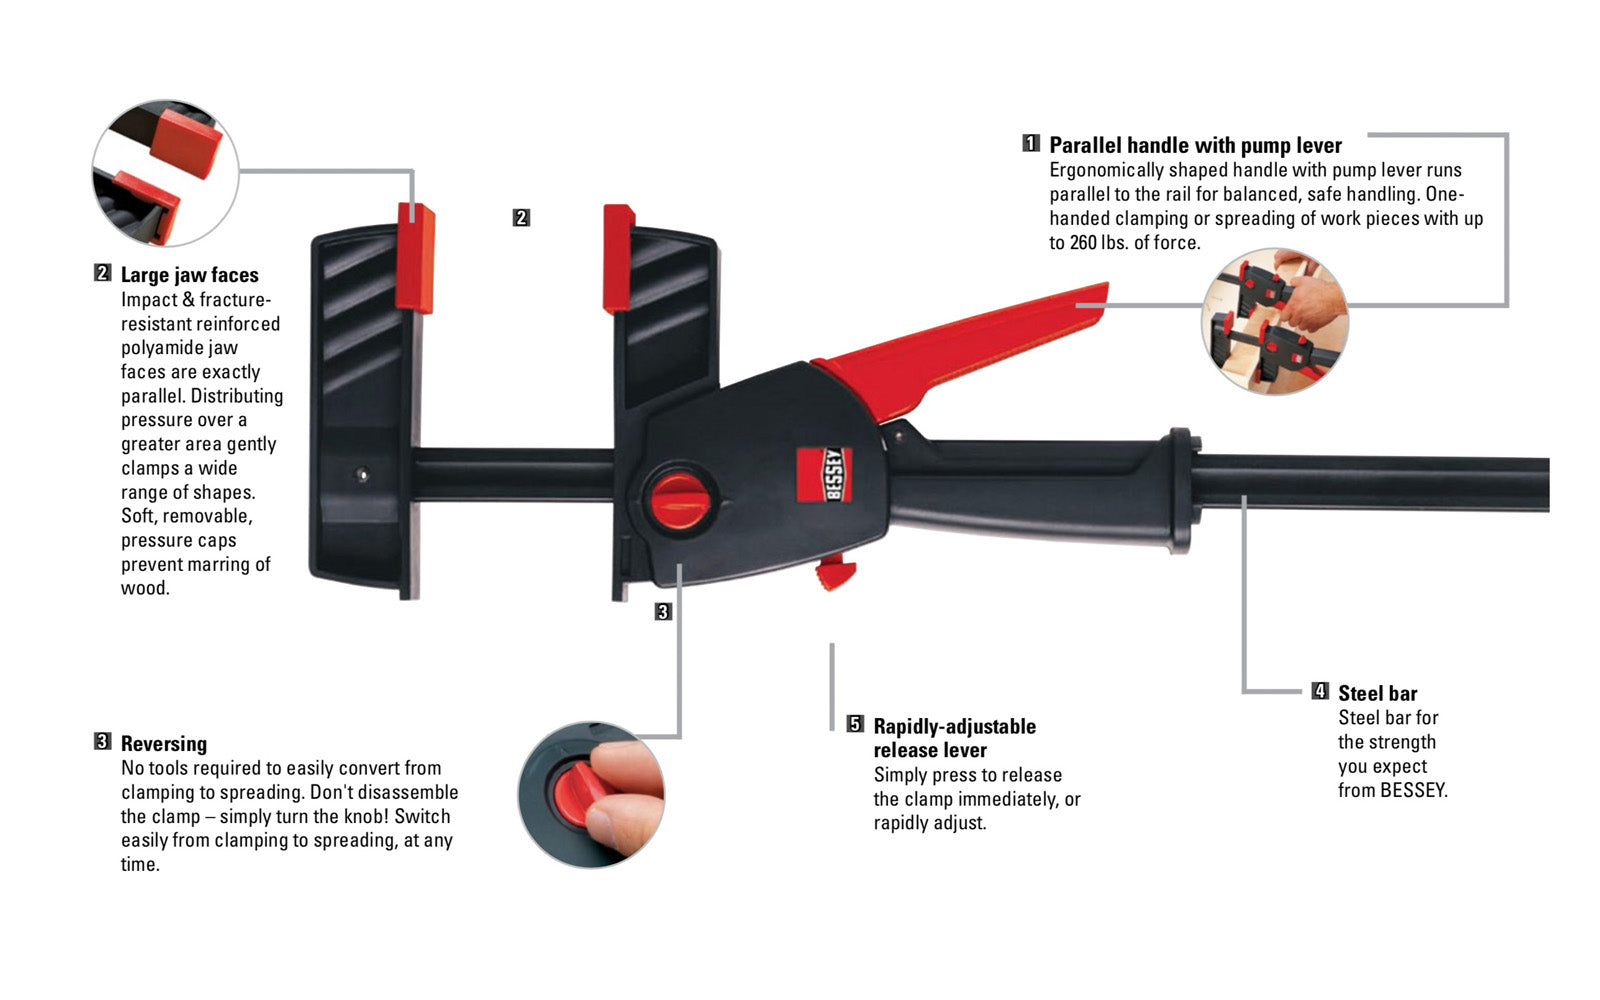 Bessey 12" DuoKlamp Clamp ~ DUO30-8 - One handed clamp & spreader. Clamp or spread with the turn of a button, no tools necessary. 12" max opening & 3-1/4" deep throat. Jaws resist flex & withstand up to 260 lb. of clamping force. Soft pressure caps prevent marring of wood by distributing pressure over a greater area.  